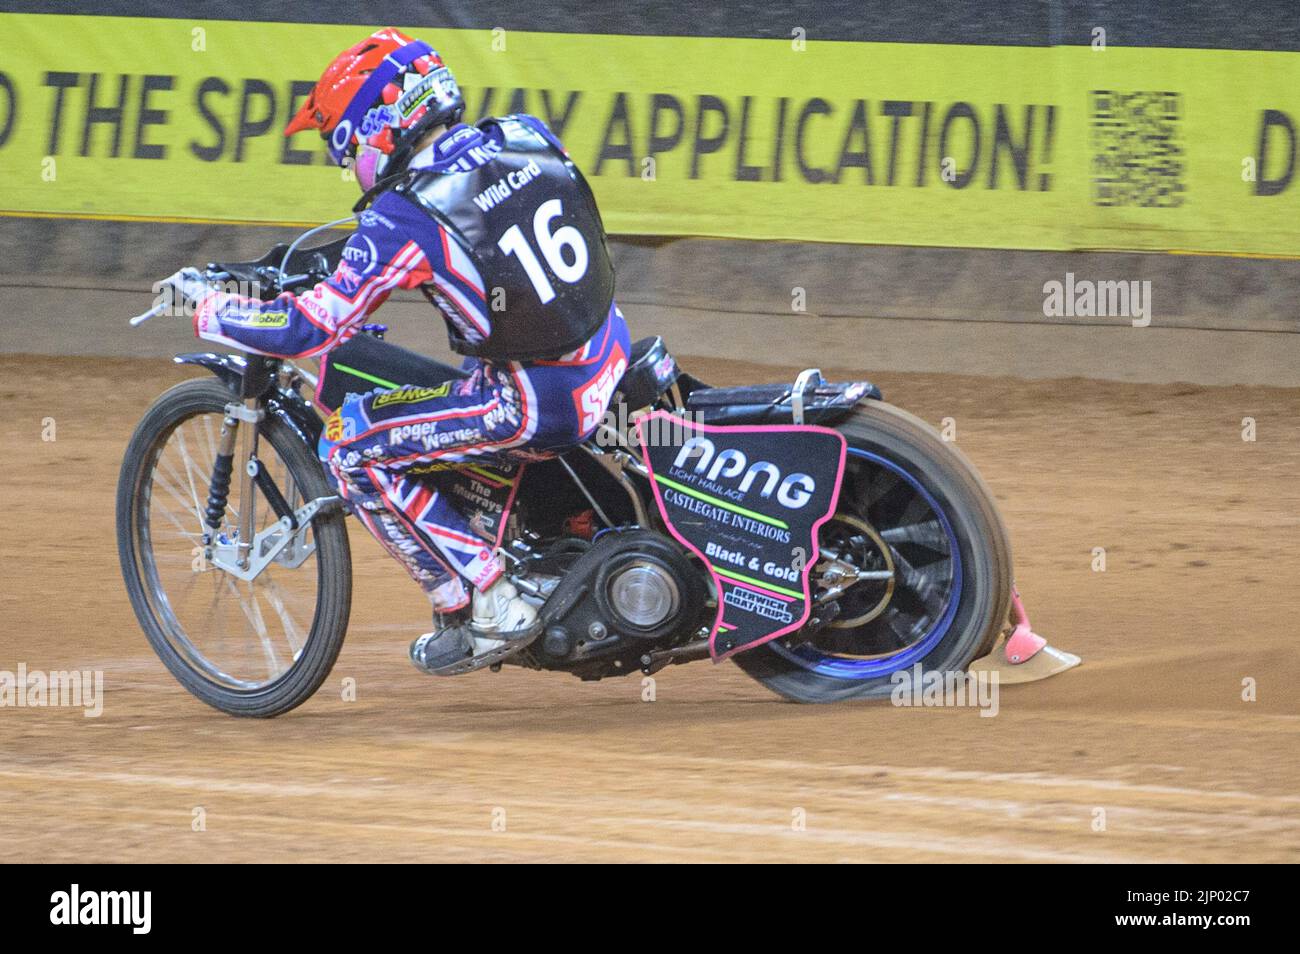 Leon Flint (Great Britain) in action during the FIM Speedway Grand Prix 2 of Great Britain at the Principality Stadium, Cardiff on Sunday 14th August 2022. (Credit: Ian Charles | MI News) Credit: MI News & Sport /Alamy Live News Stock Photo